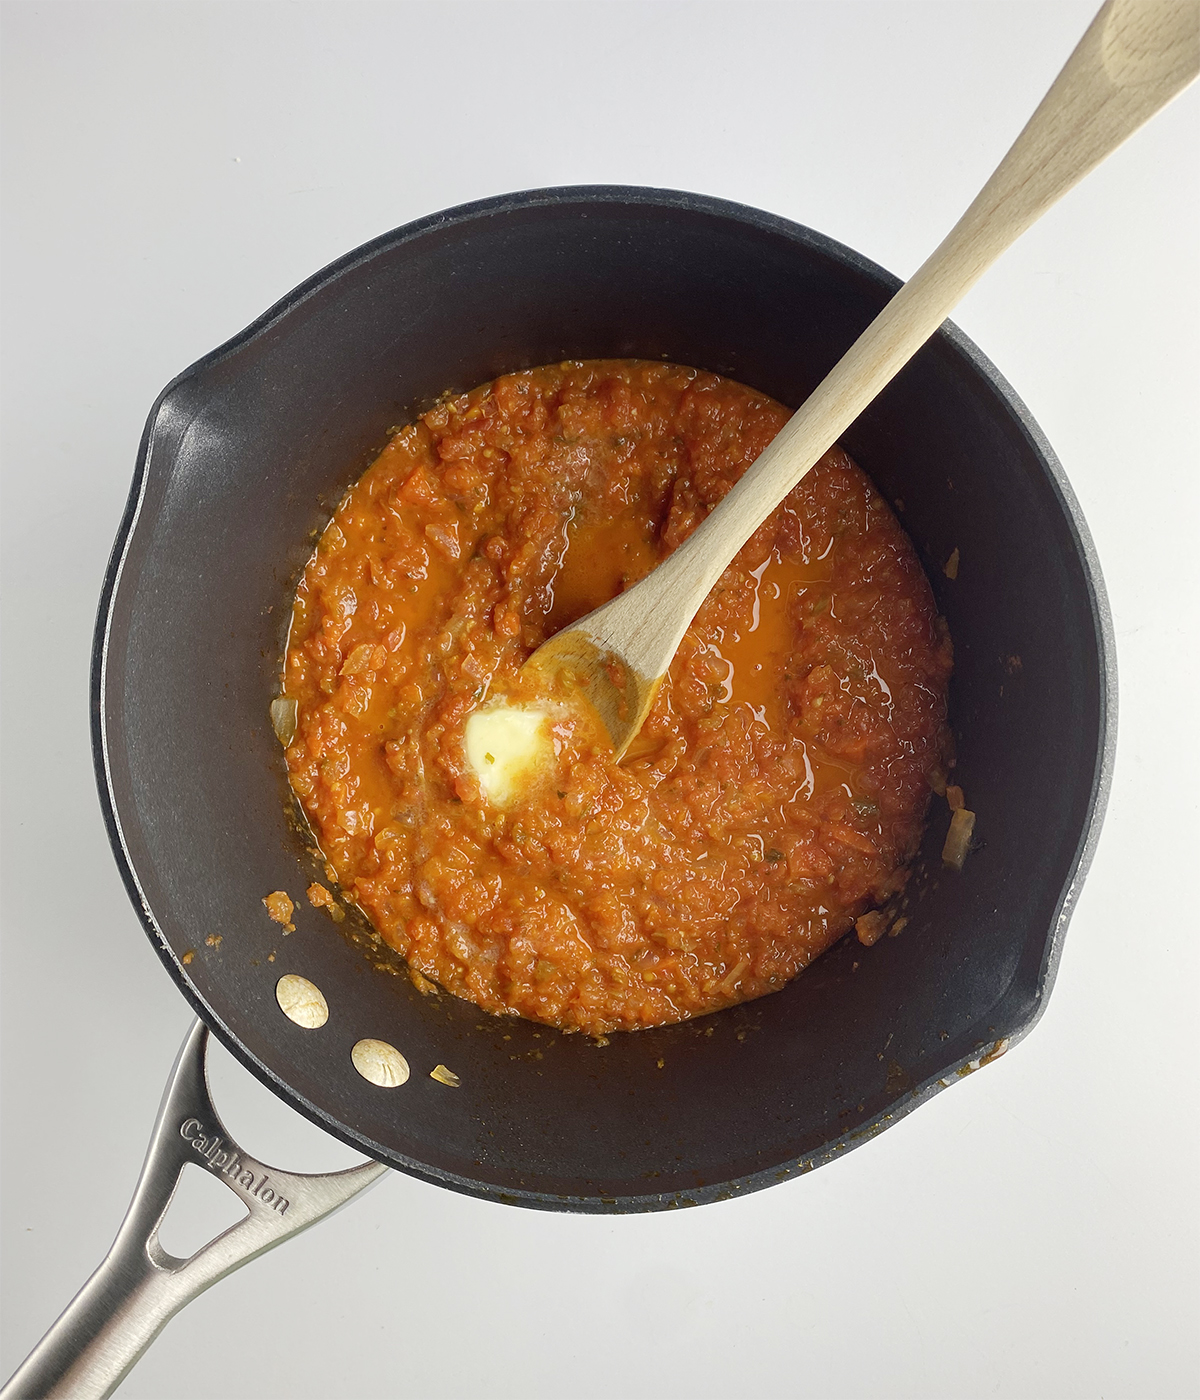 Tomato sauce in a pot with butter melting